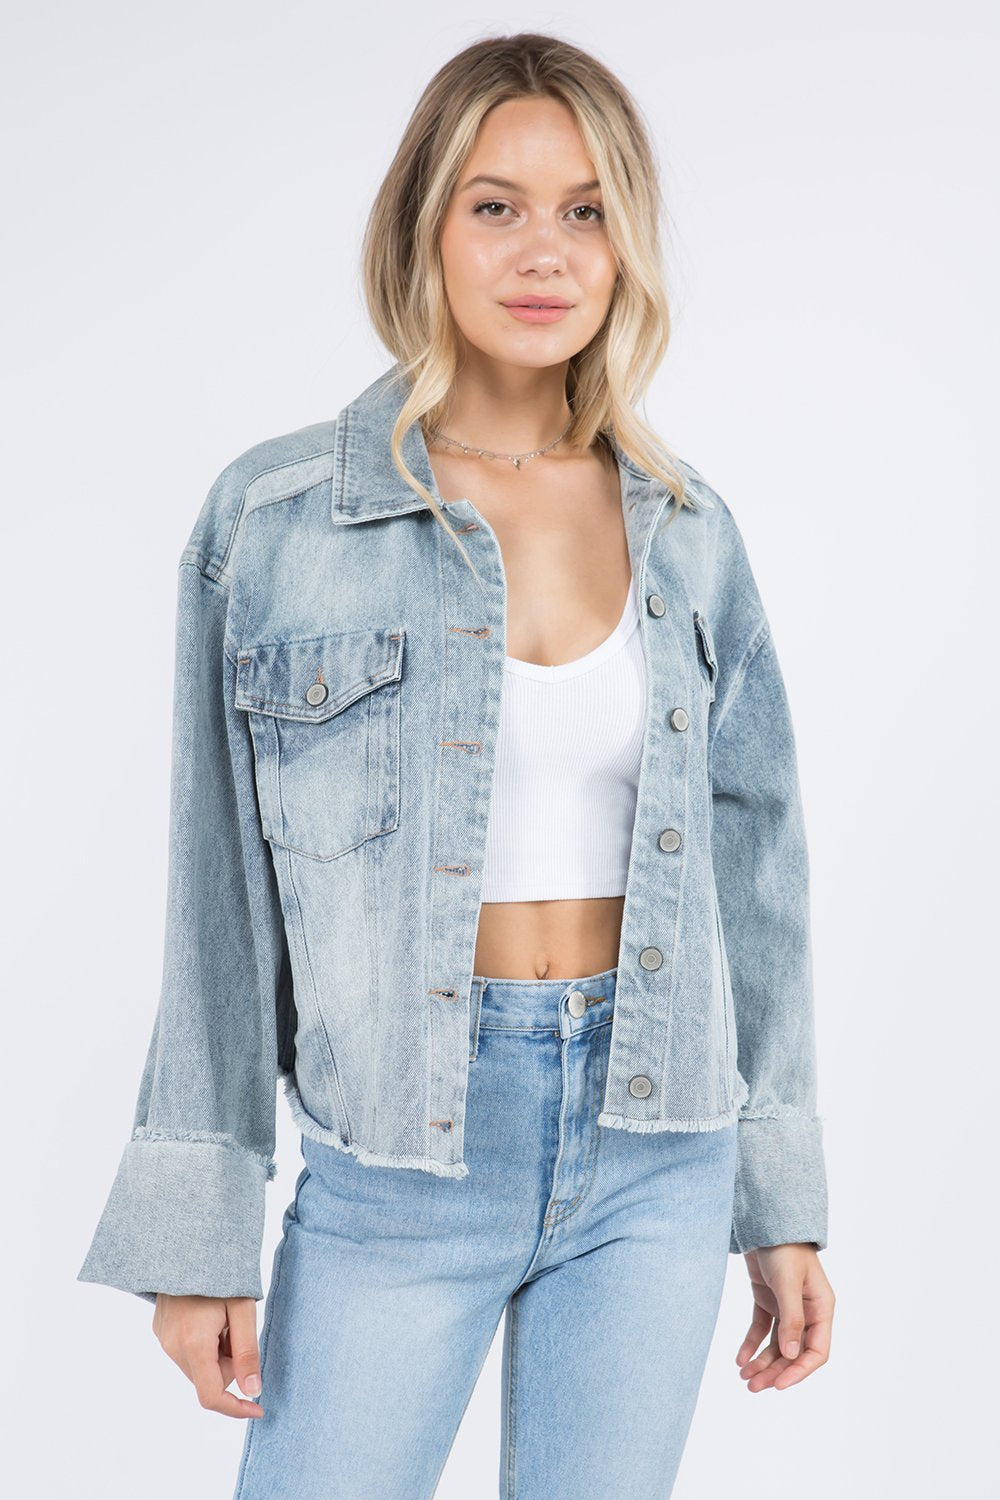 Blushia Full Sleeve Solid Women Denim Jacket - Buy Blushia Full Sleeve  Solid Women Denim Jacket Online at Best Prices in India